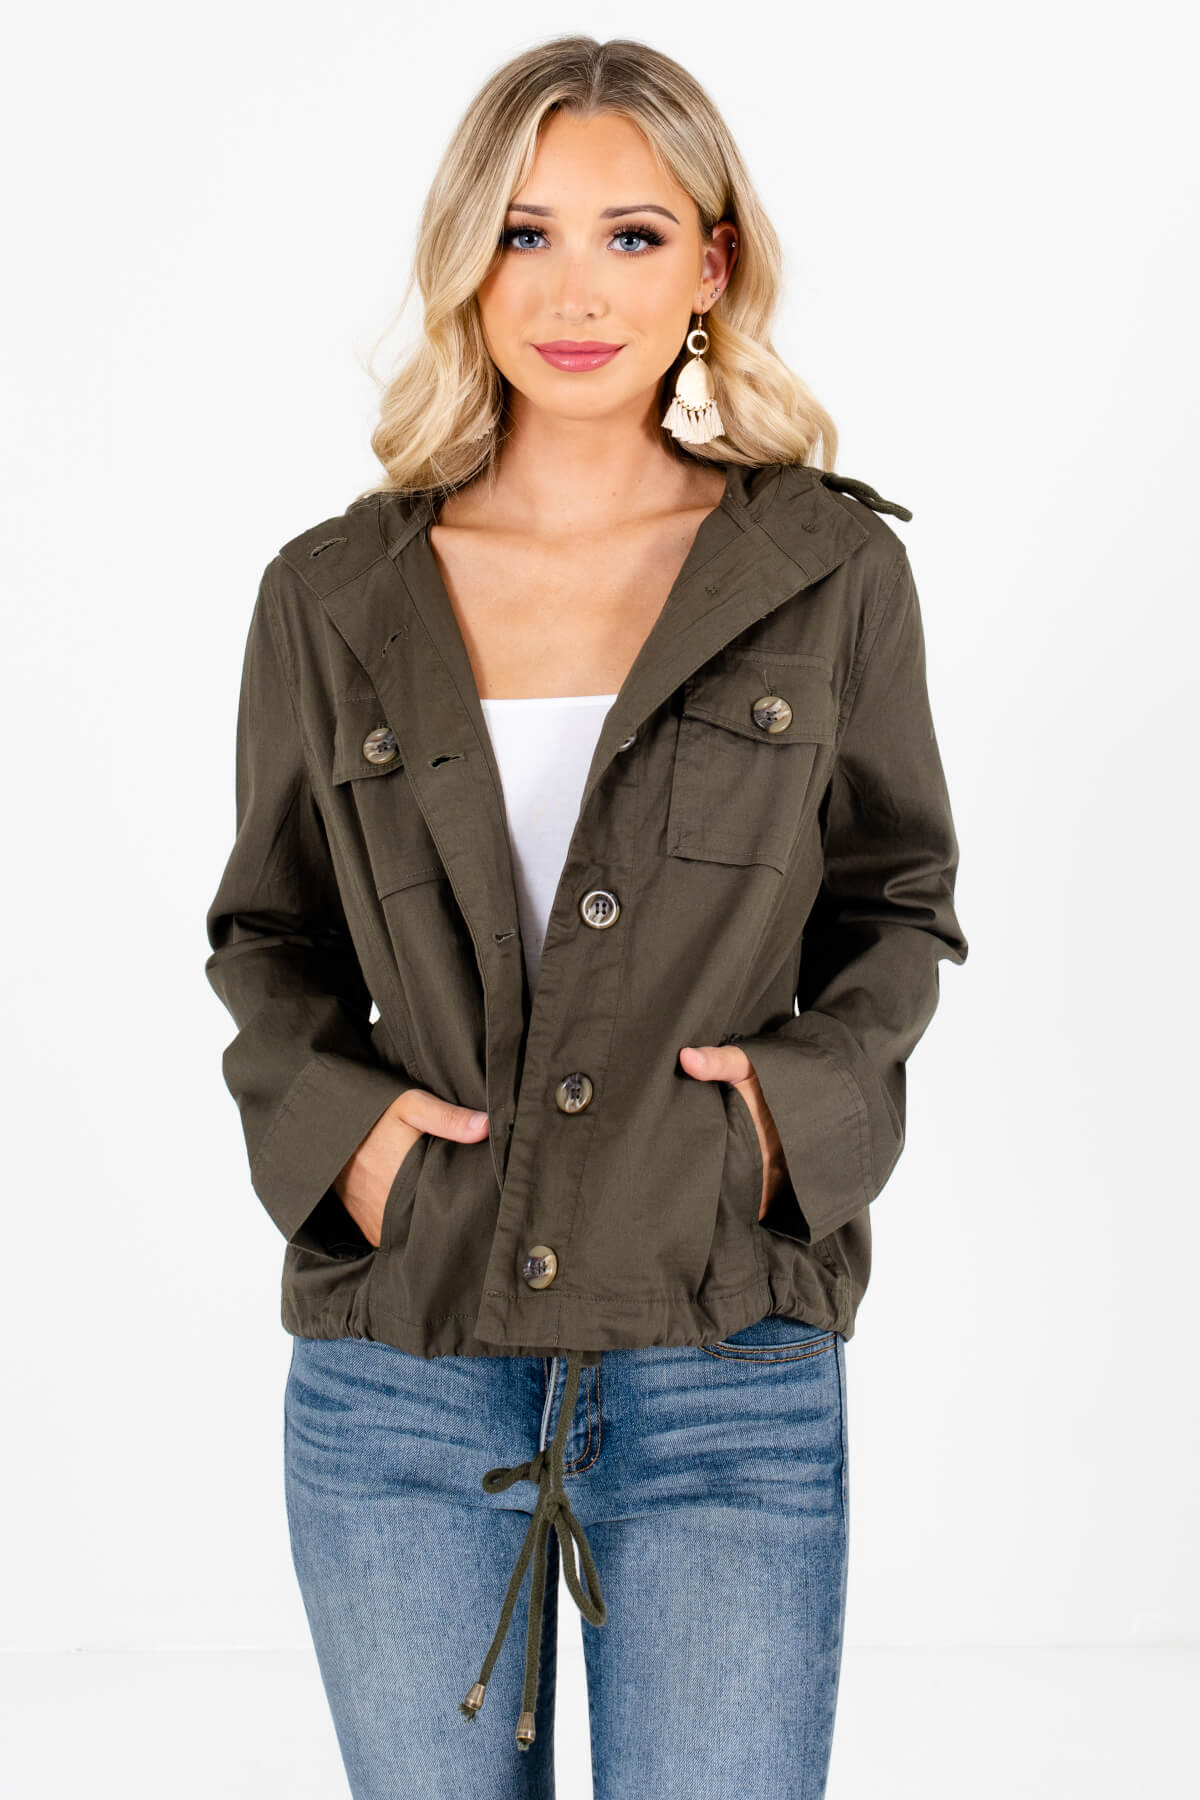 Olive Green Button-Up Front Boutique Jackets for Women